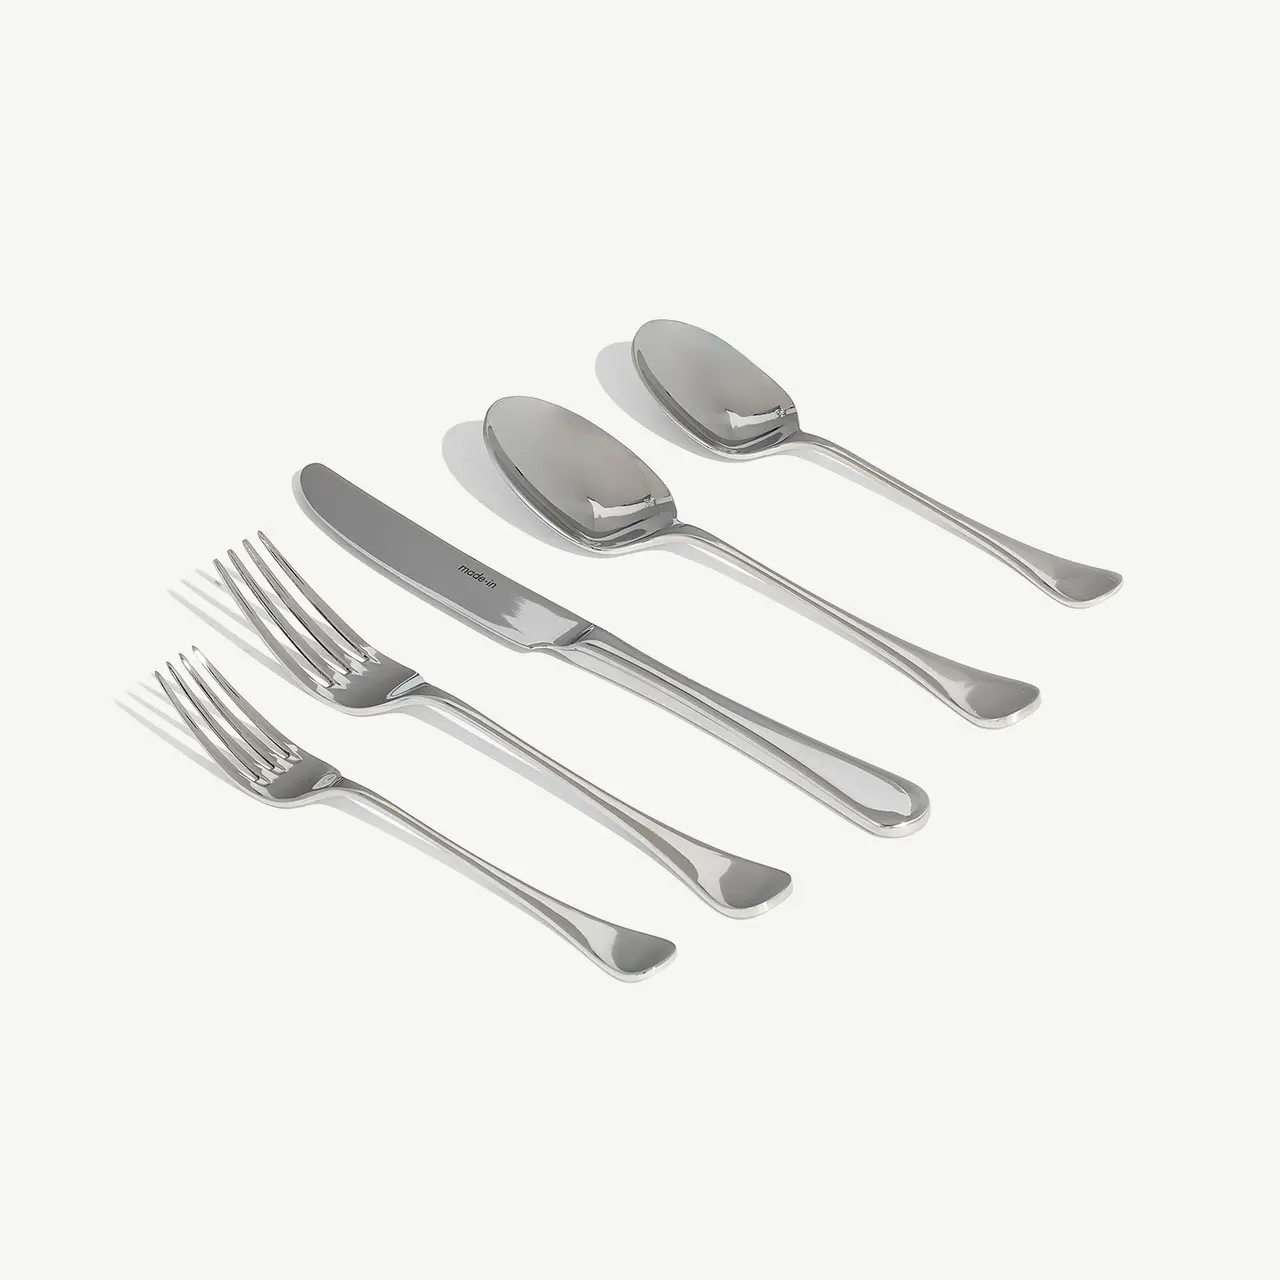 A set of silverware, including forks, a knife, and spoons, is neatly arranged on a light background.